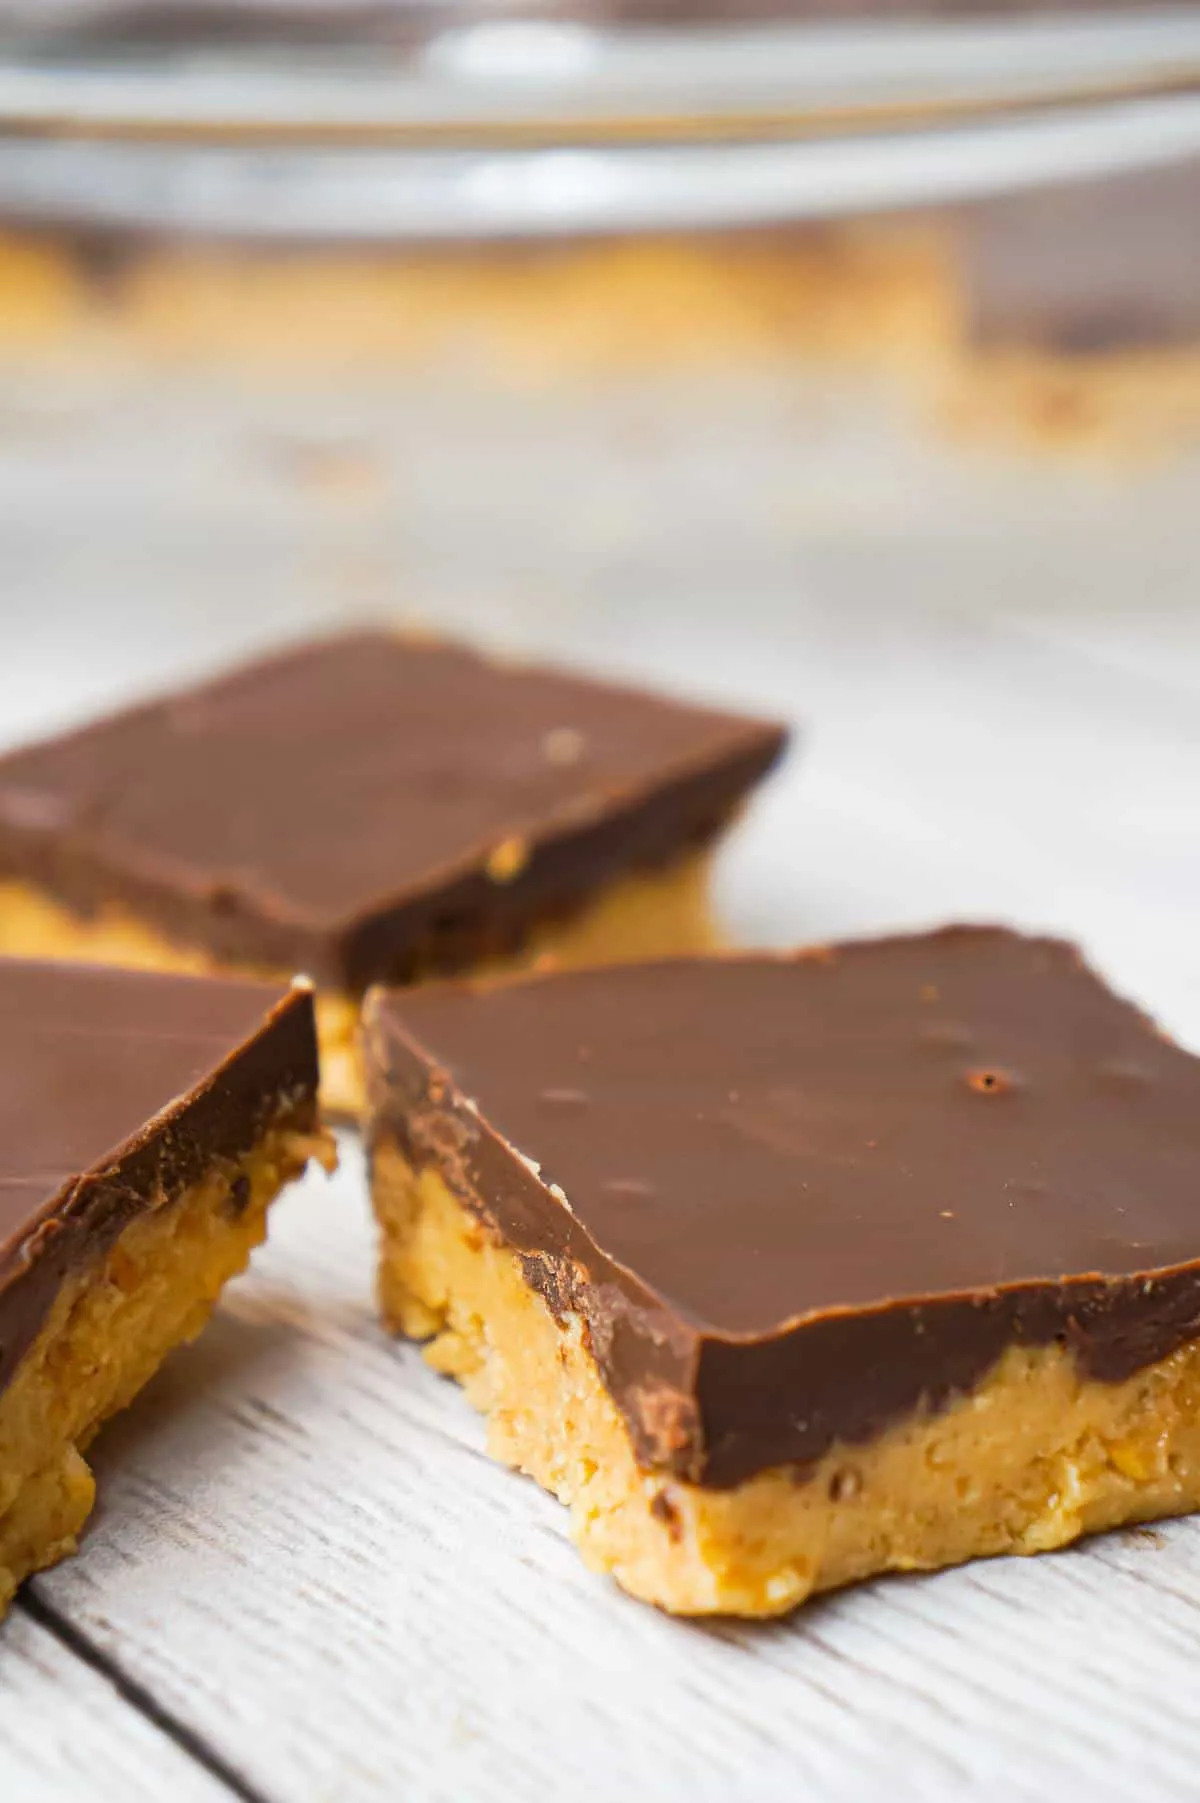 No Bake Peanut Butter Bars are tasty treats with a peanut butter and Ritz cracker crumb base and topped with chocolate.